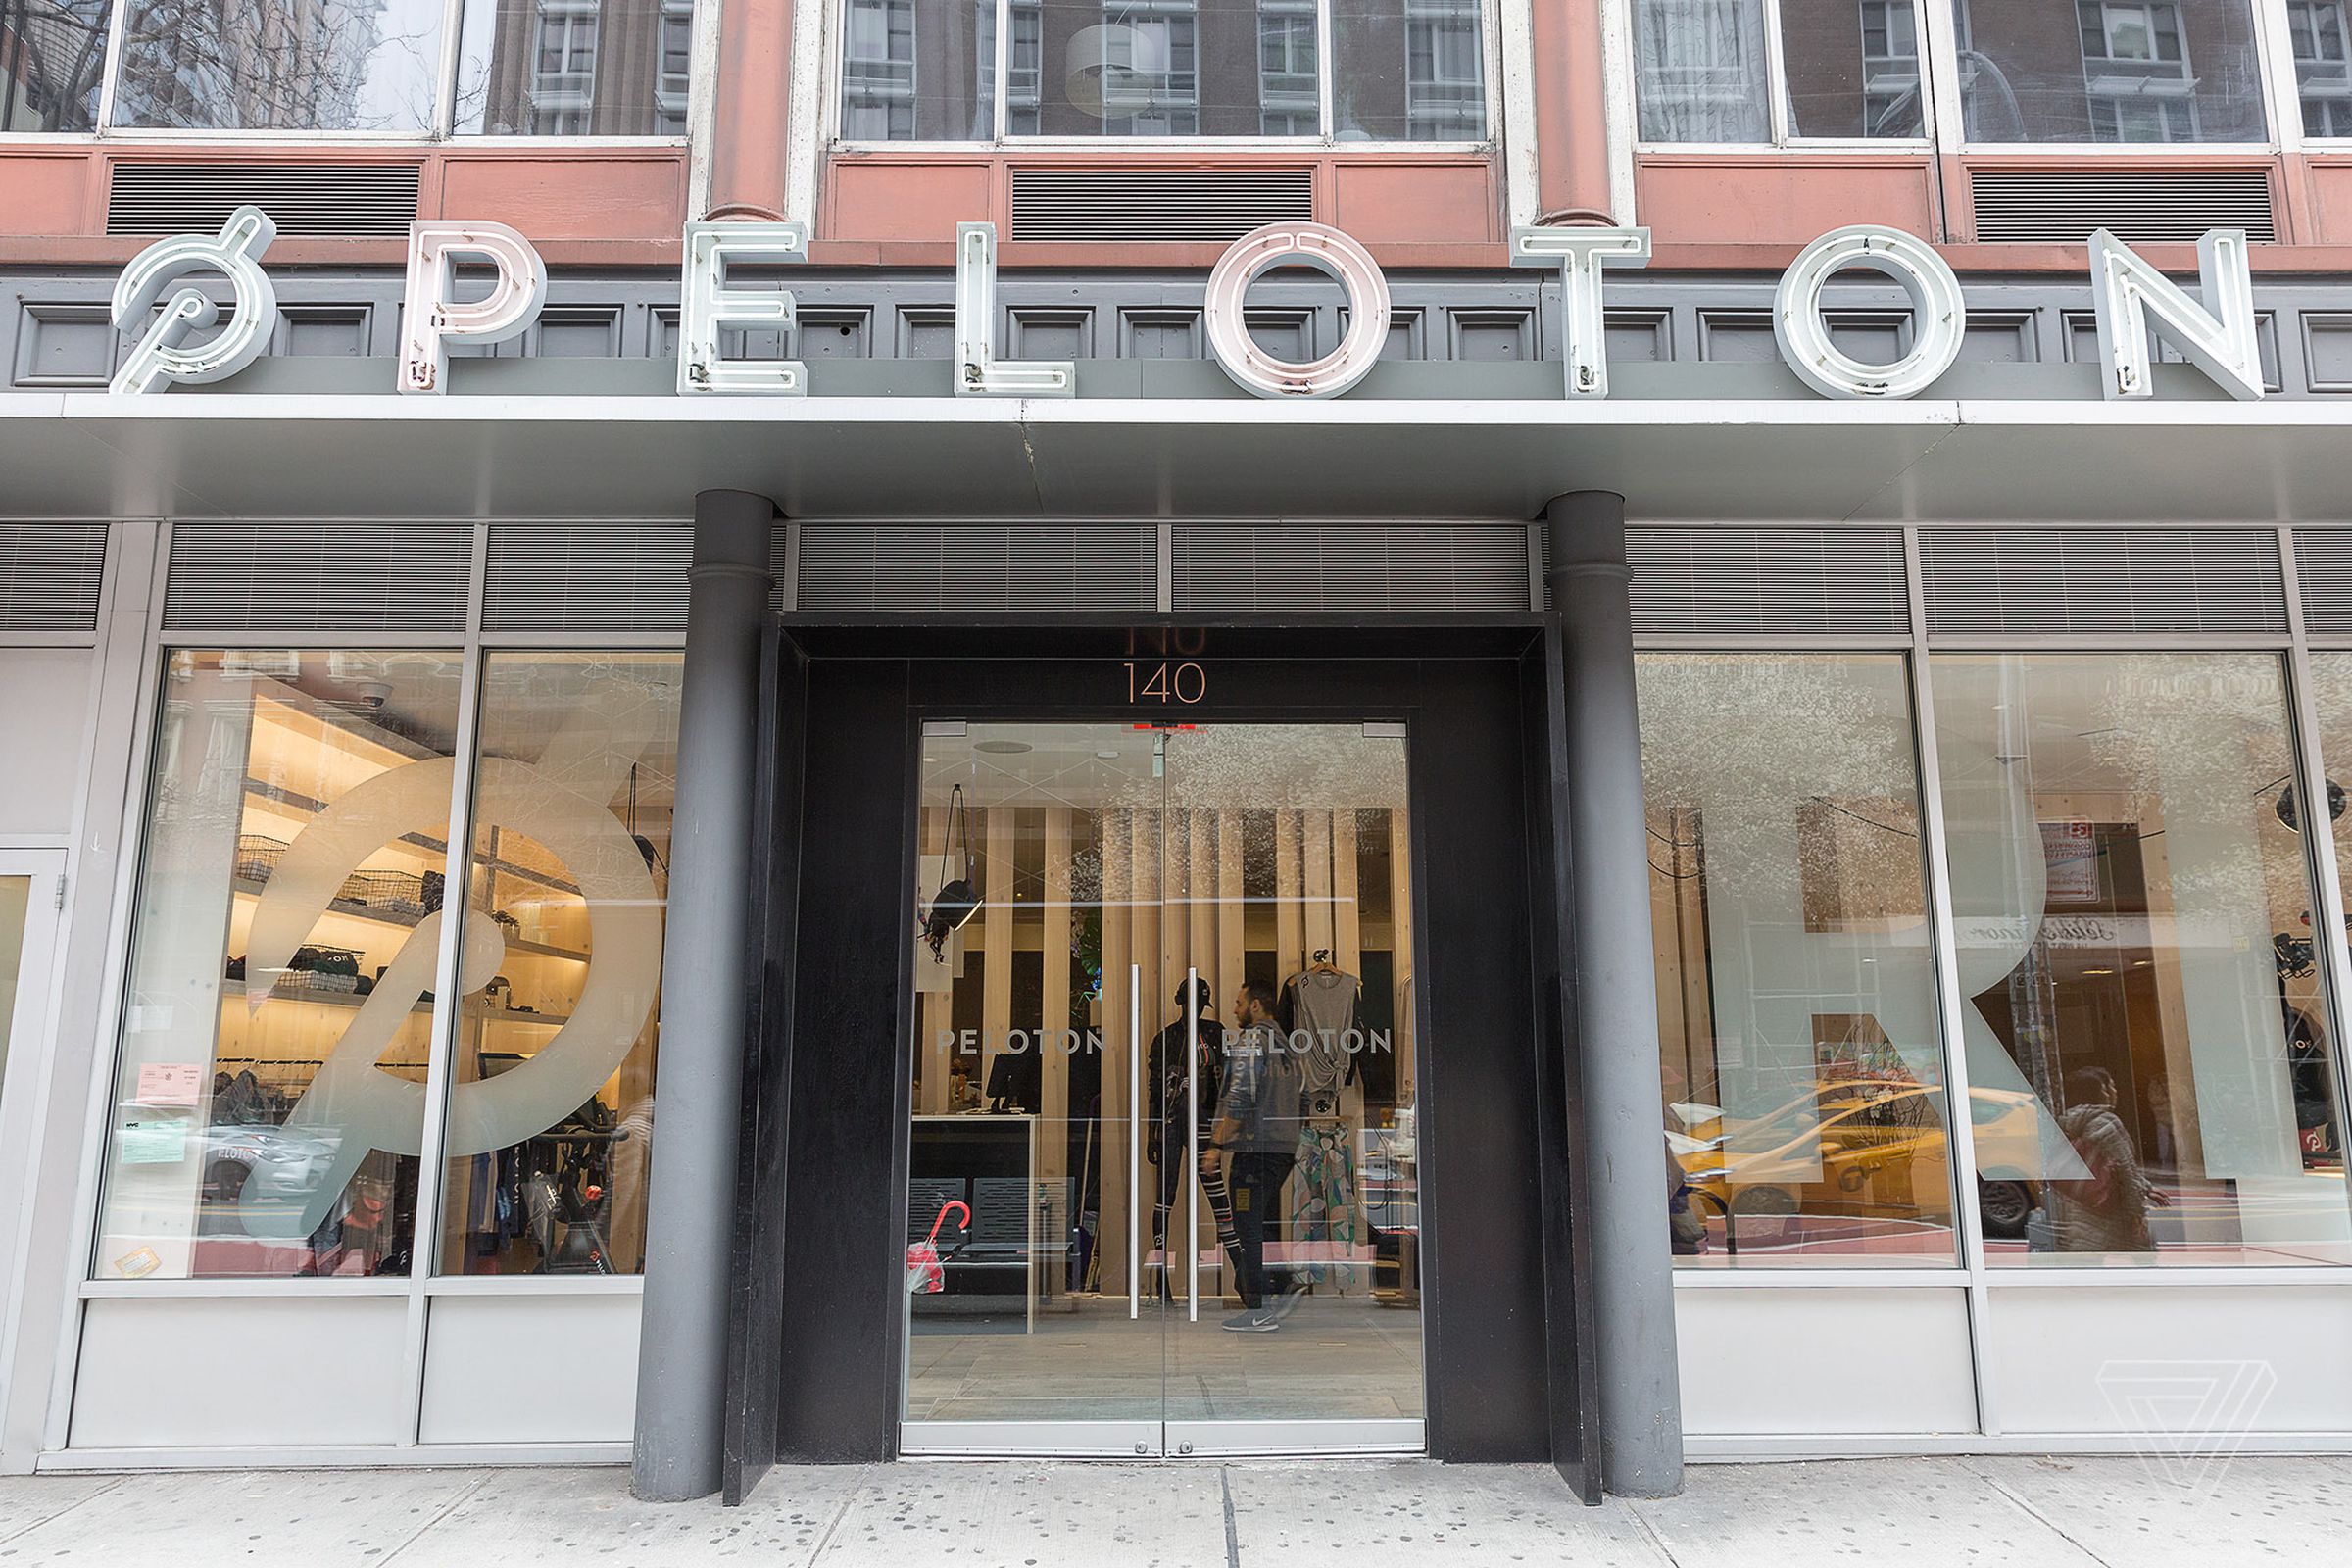 The Peloton studio in New York City, where all of the live videos are streamed from.